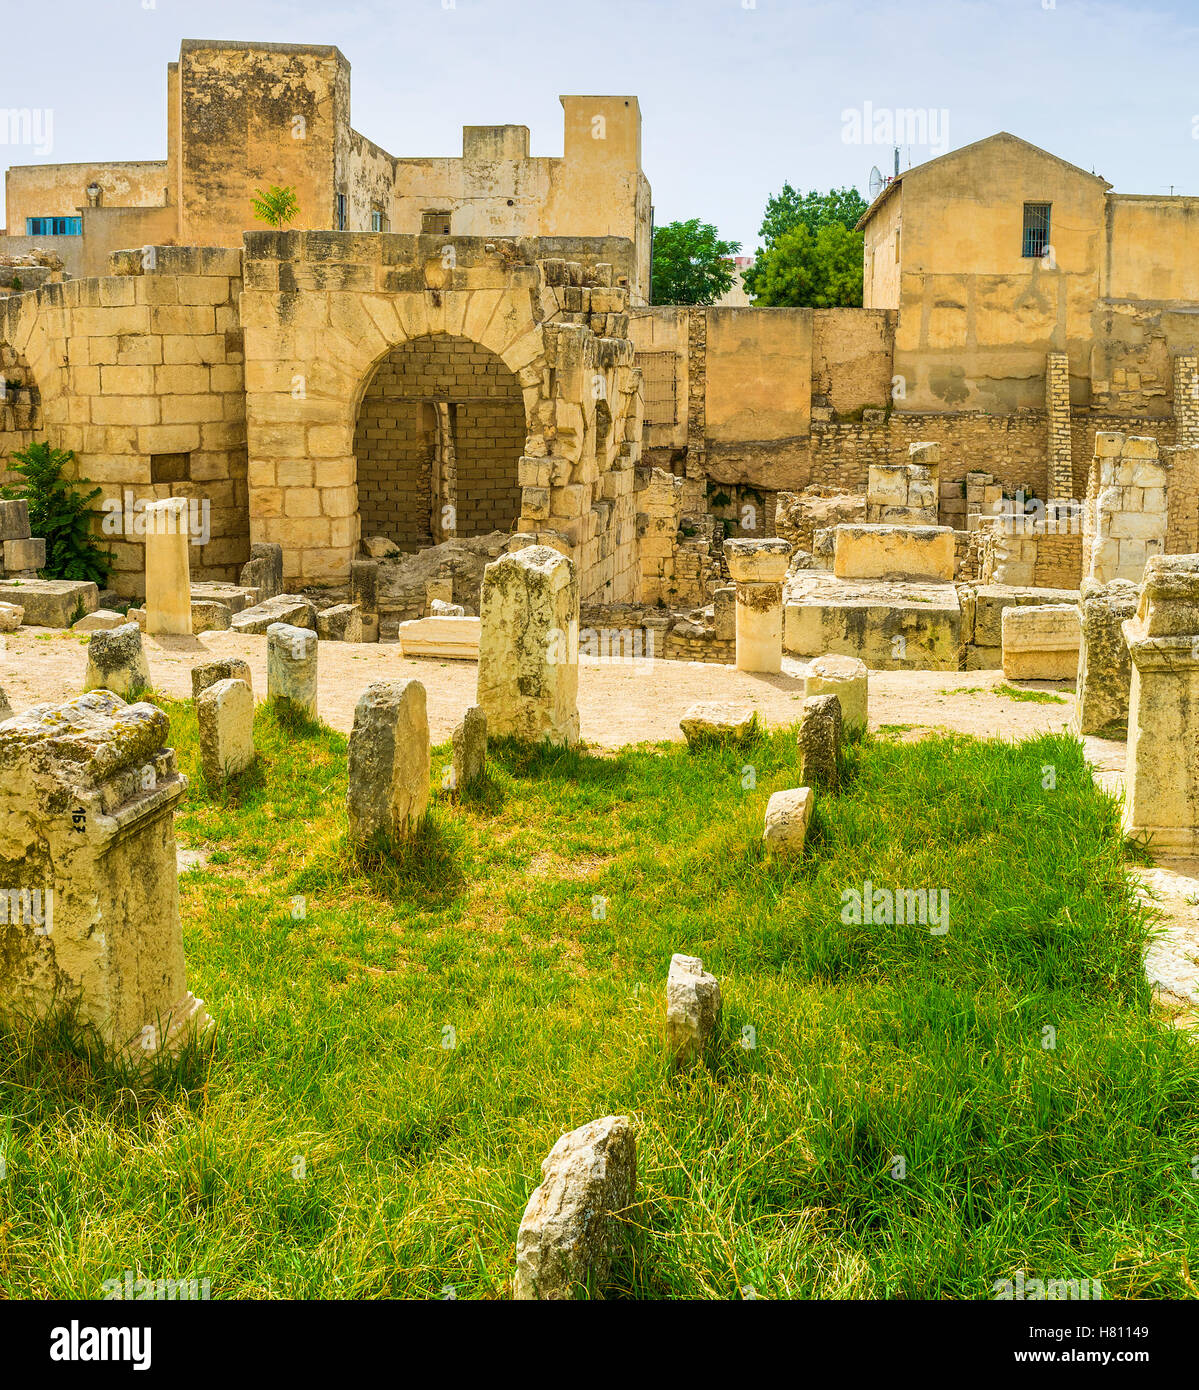 The ancient ruins of the Roman baths are the notable landmark of El Kef, Tunisia. Stock Photo